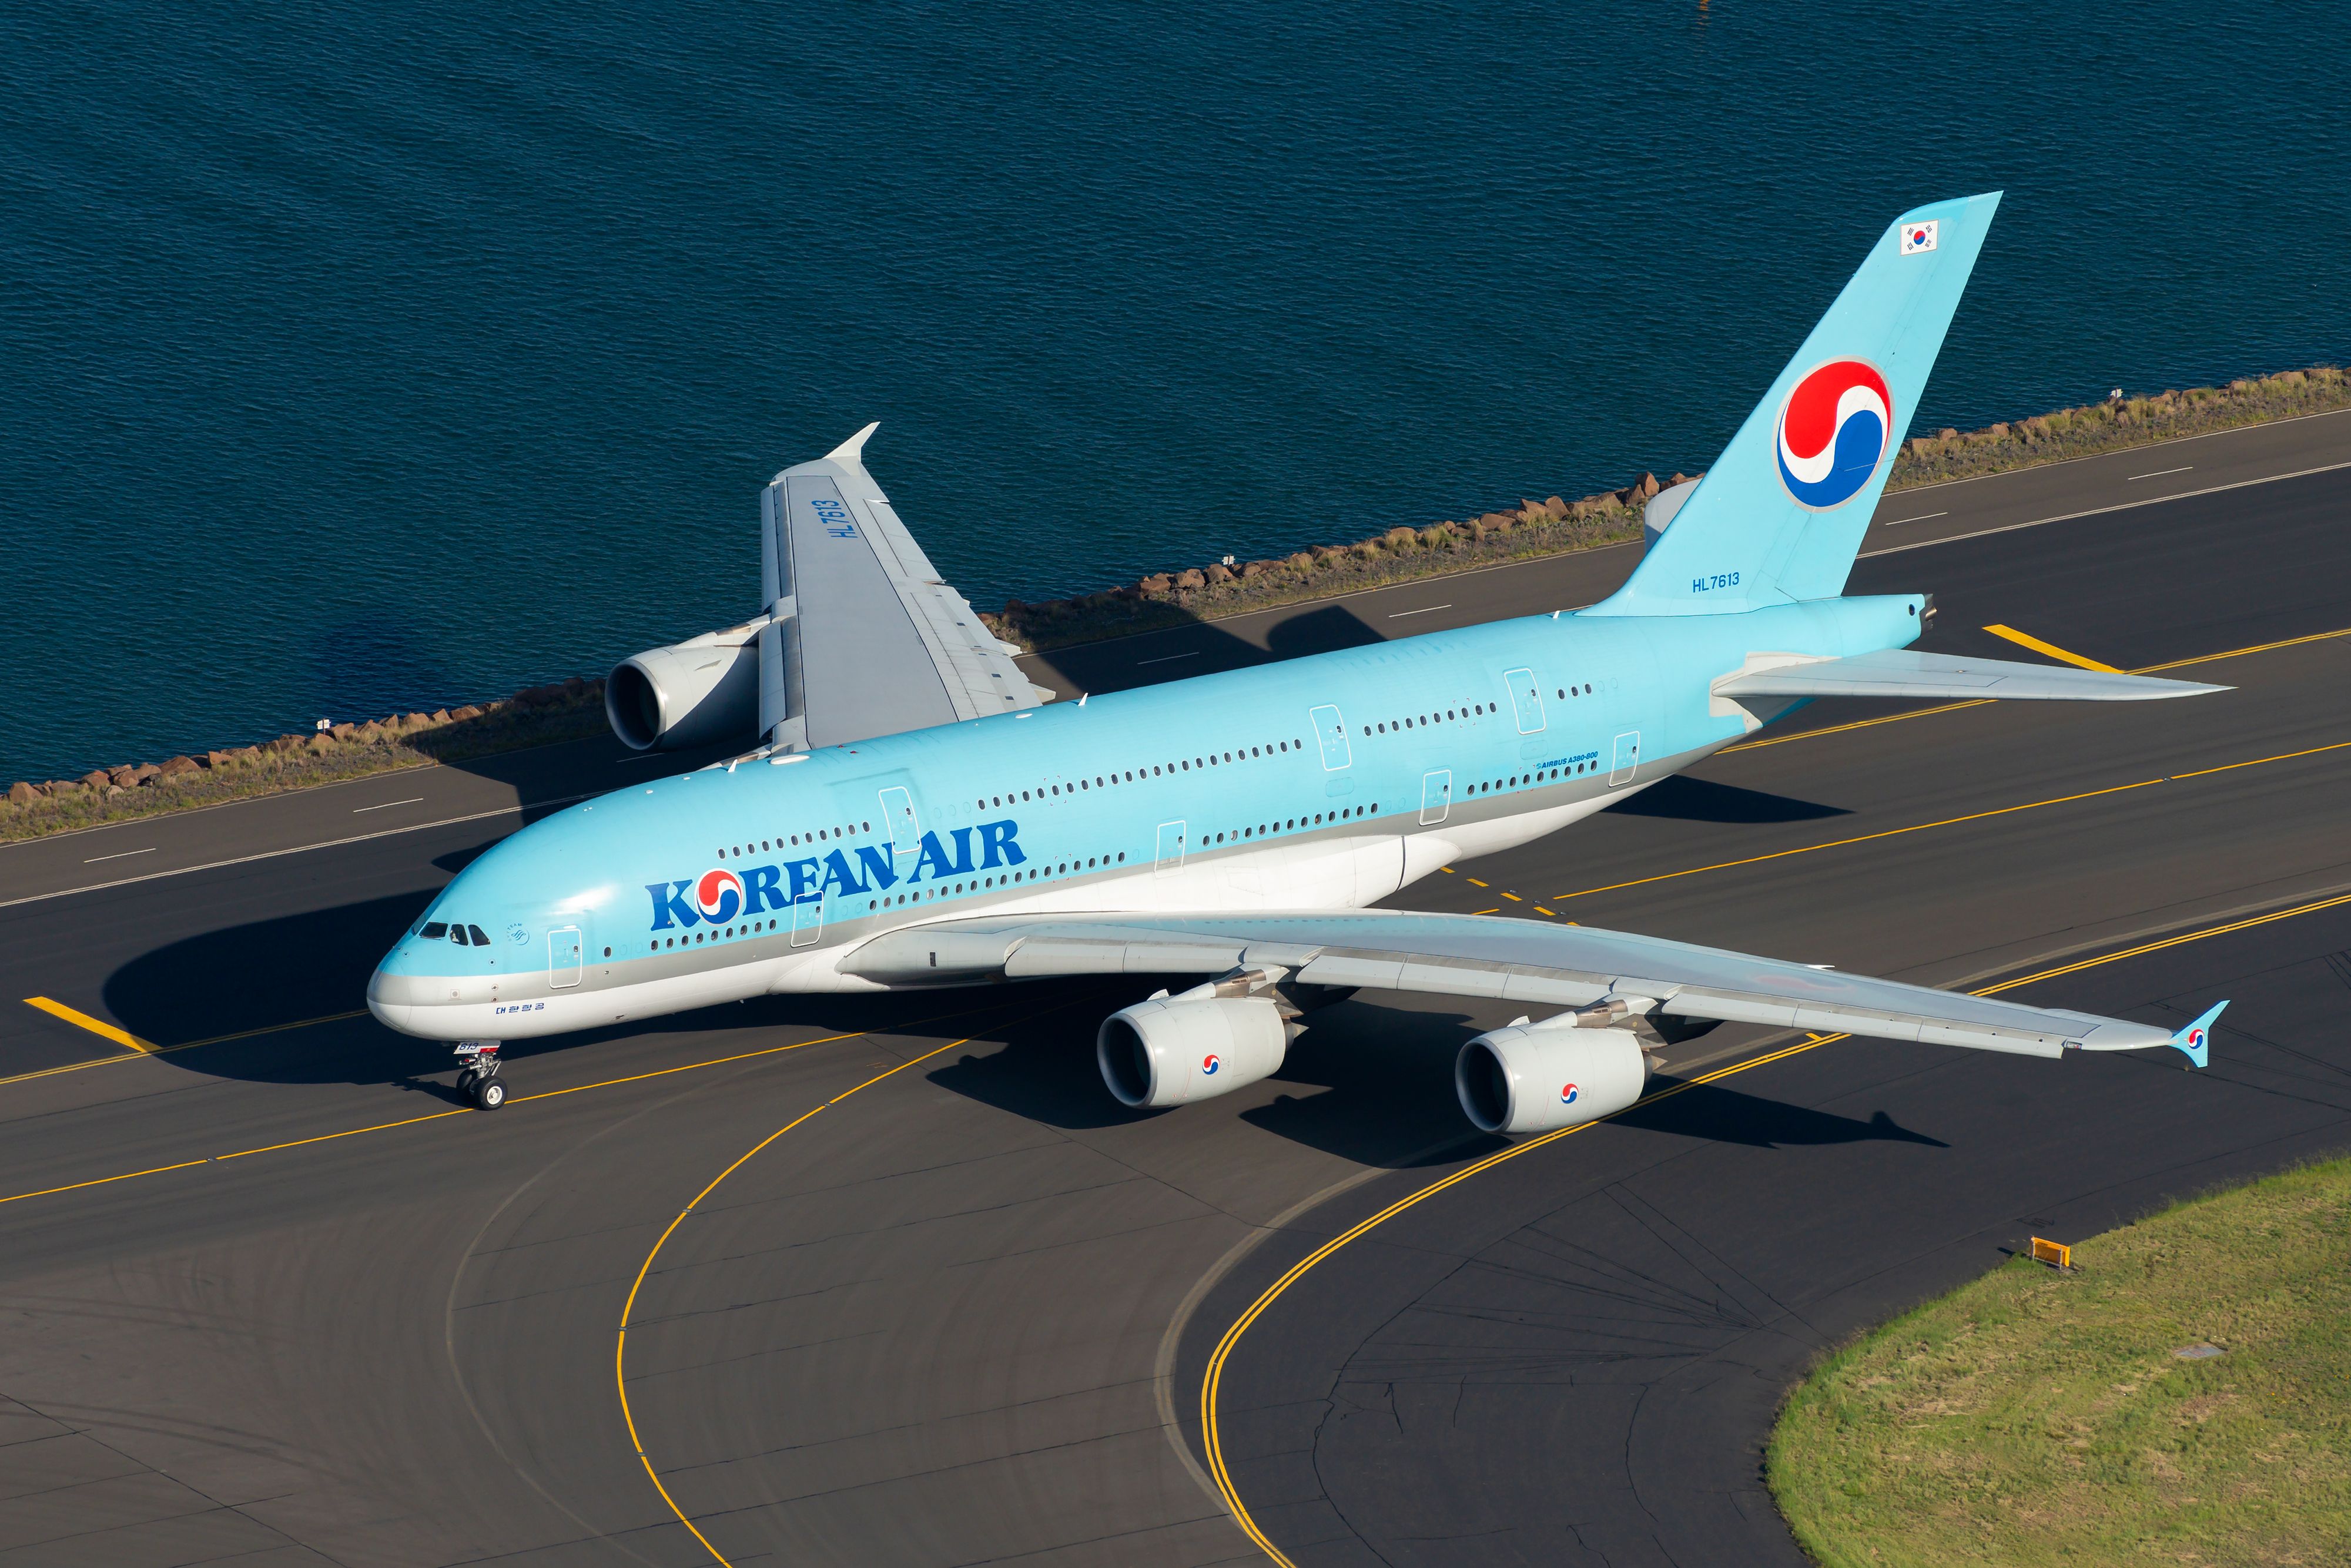 A Korean Air Airbus A380 taxiing to the runway.